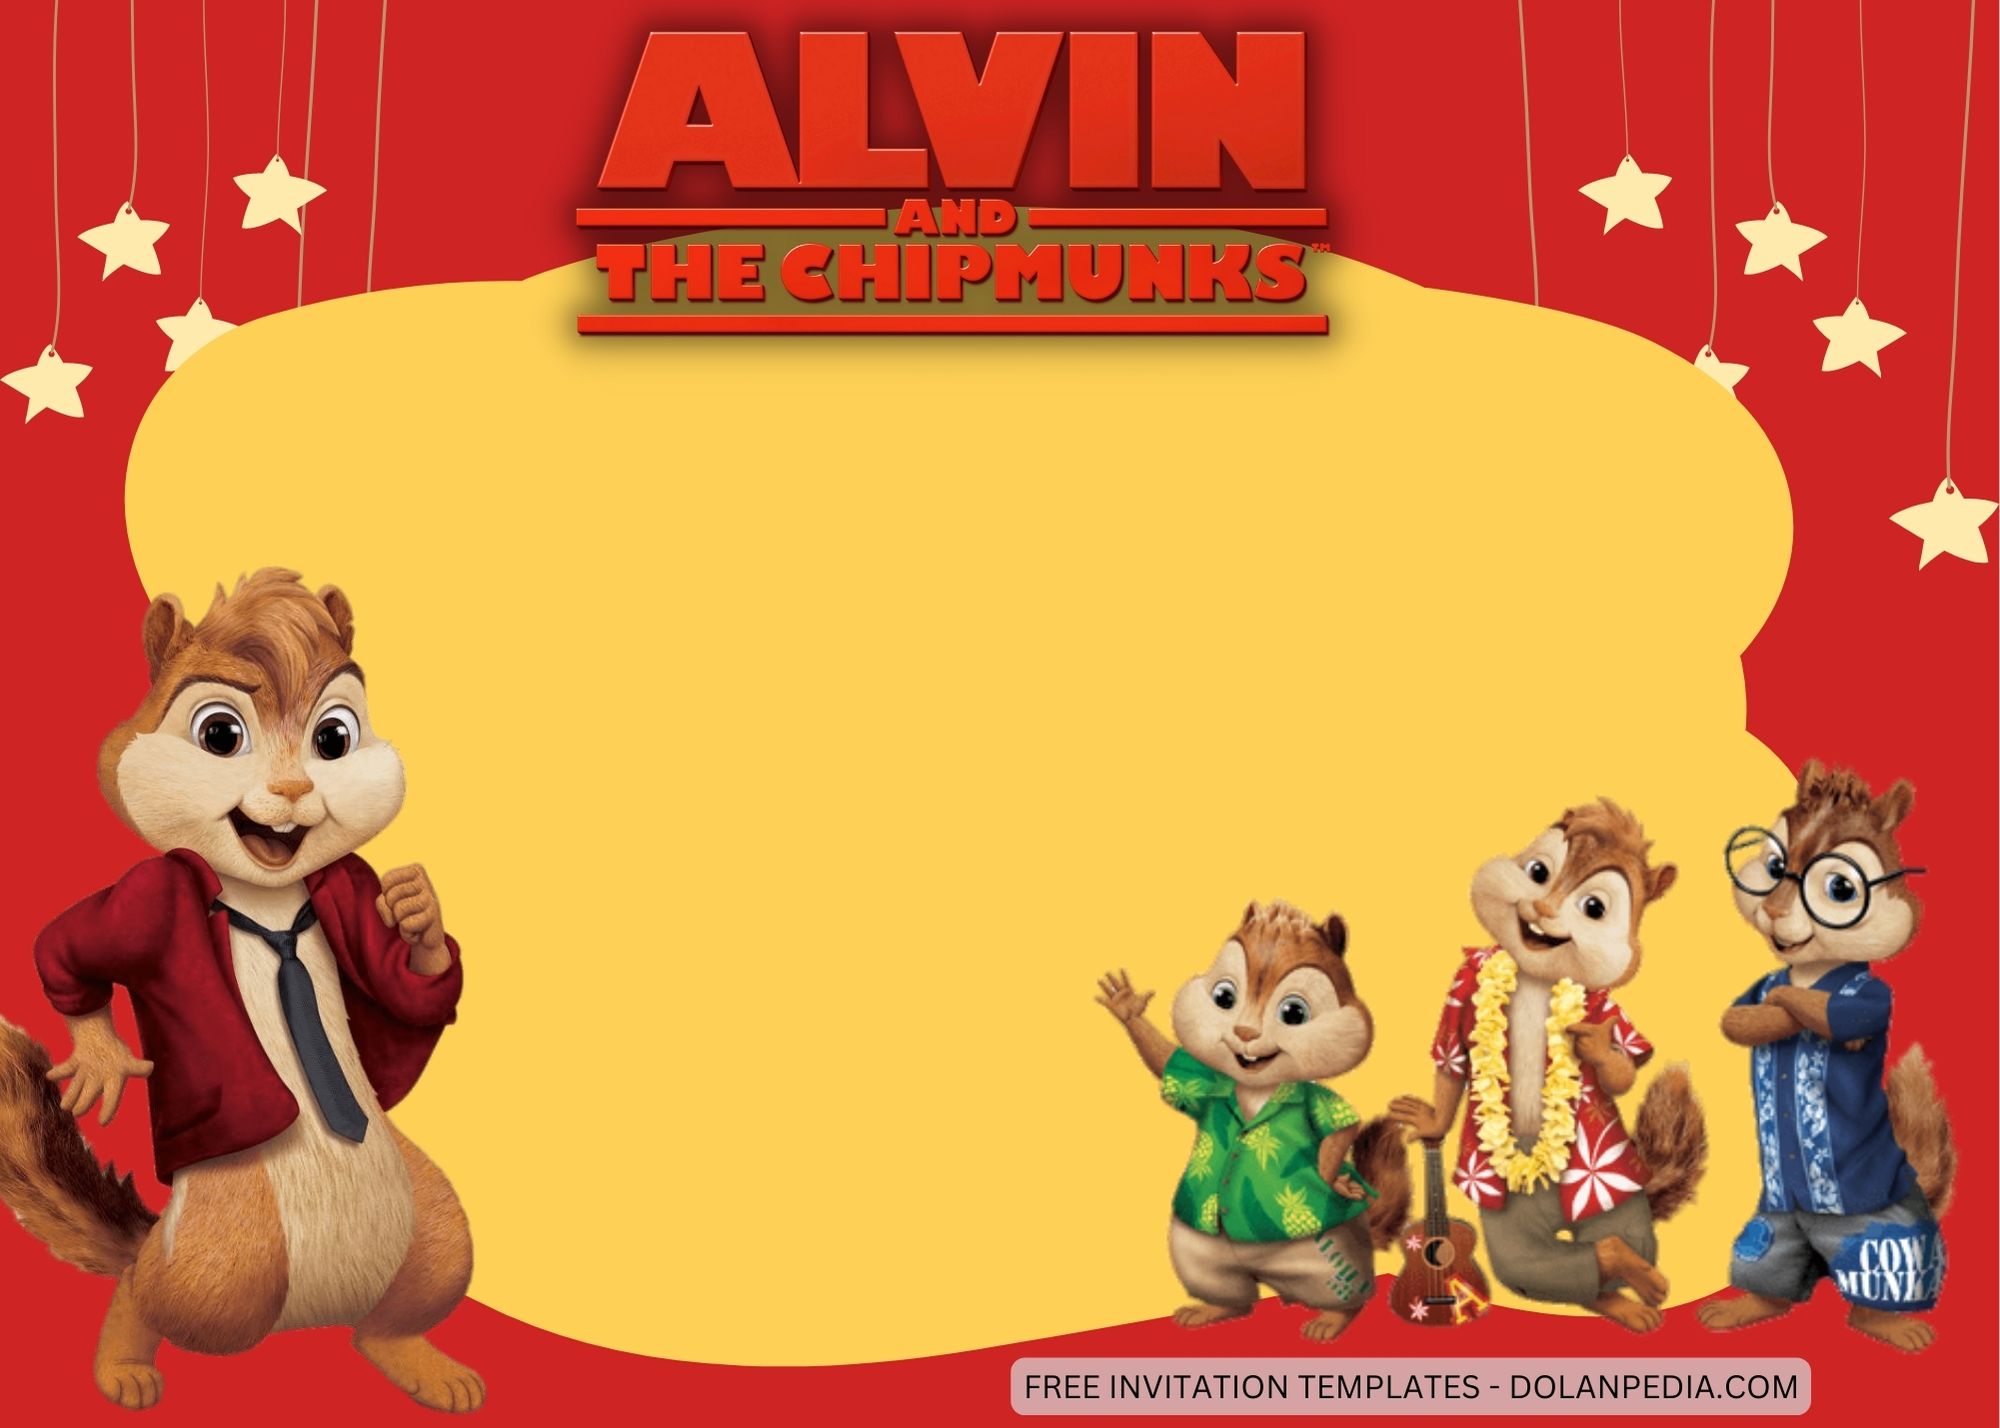 Blank Alvin and The Chipmunks Birthday Invitation Templates two